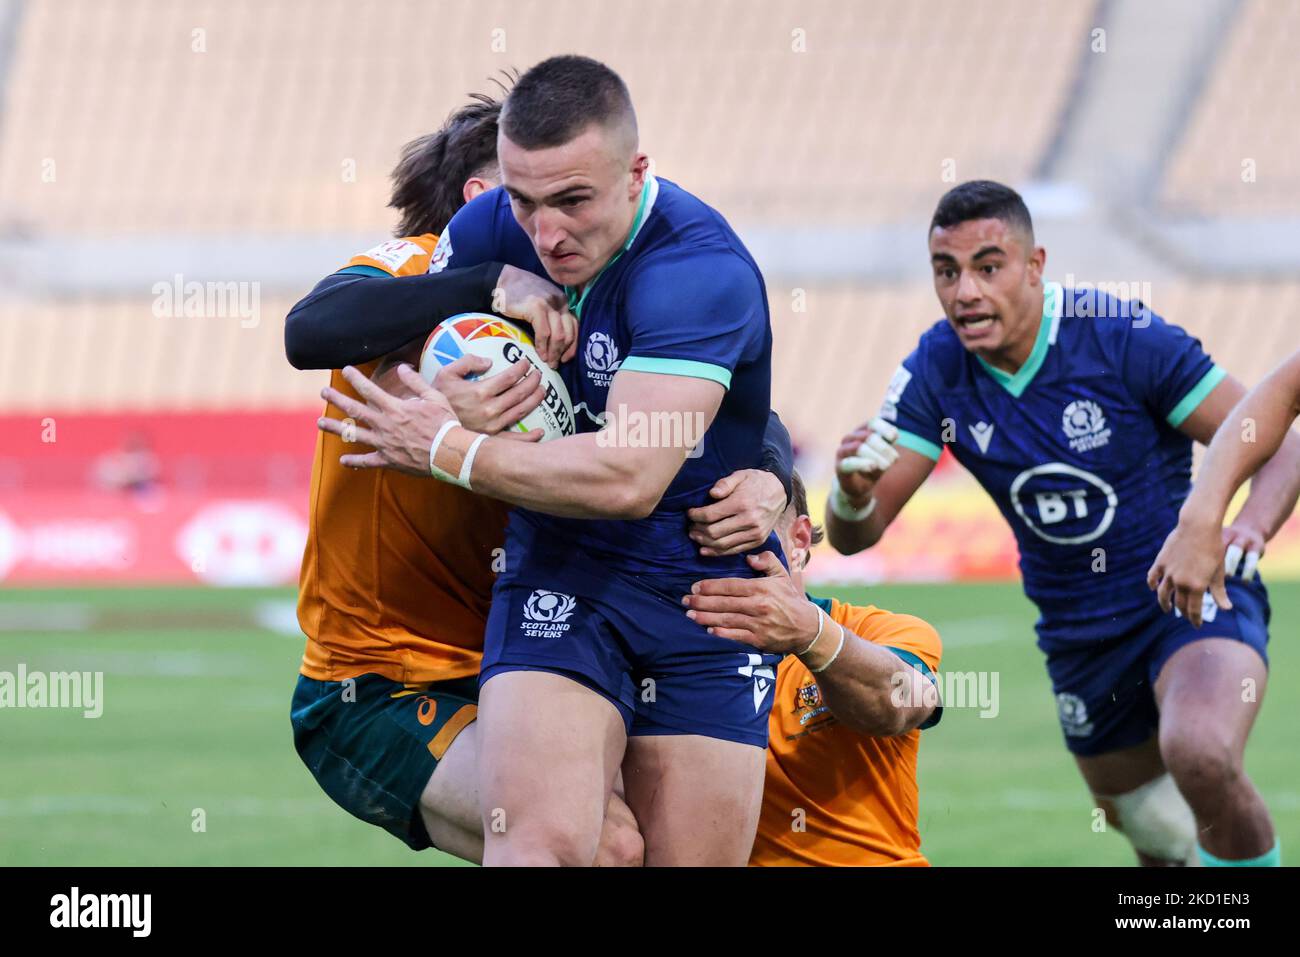 Ross McCann of Scotland runs with the ball during the Men's HSBC World Rugby Sevens Series 2022 match between Australian and Scotland at the La Cartuja stadium in Seville, on January 28, 2022. (Photo by DAX Images/NurPhoto) Stock Photo